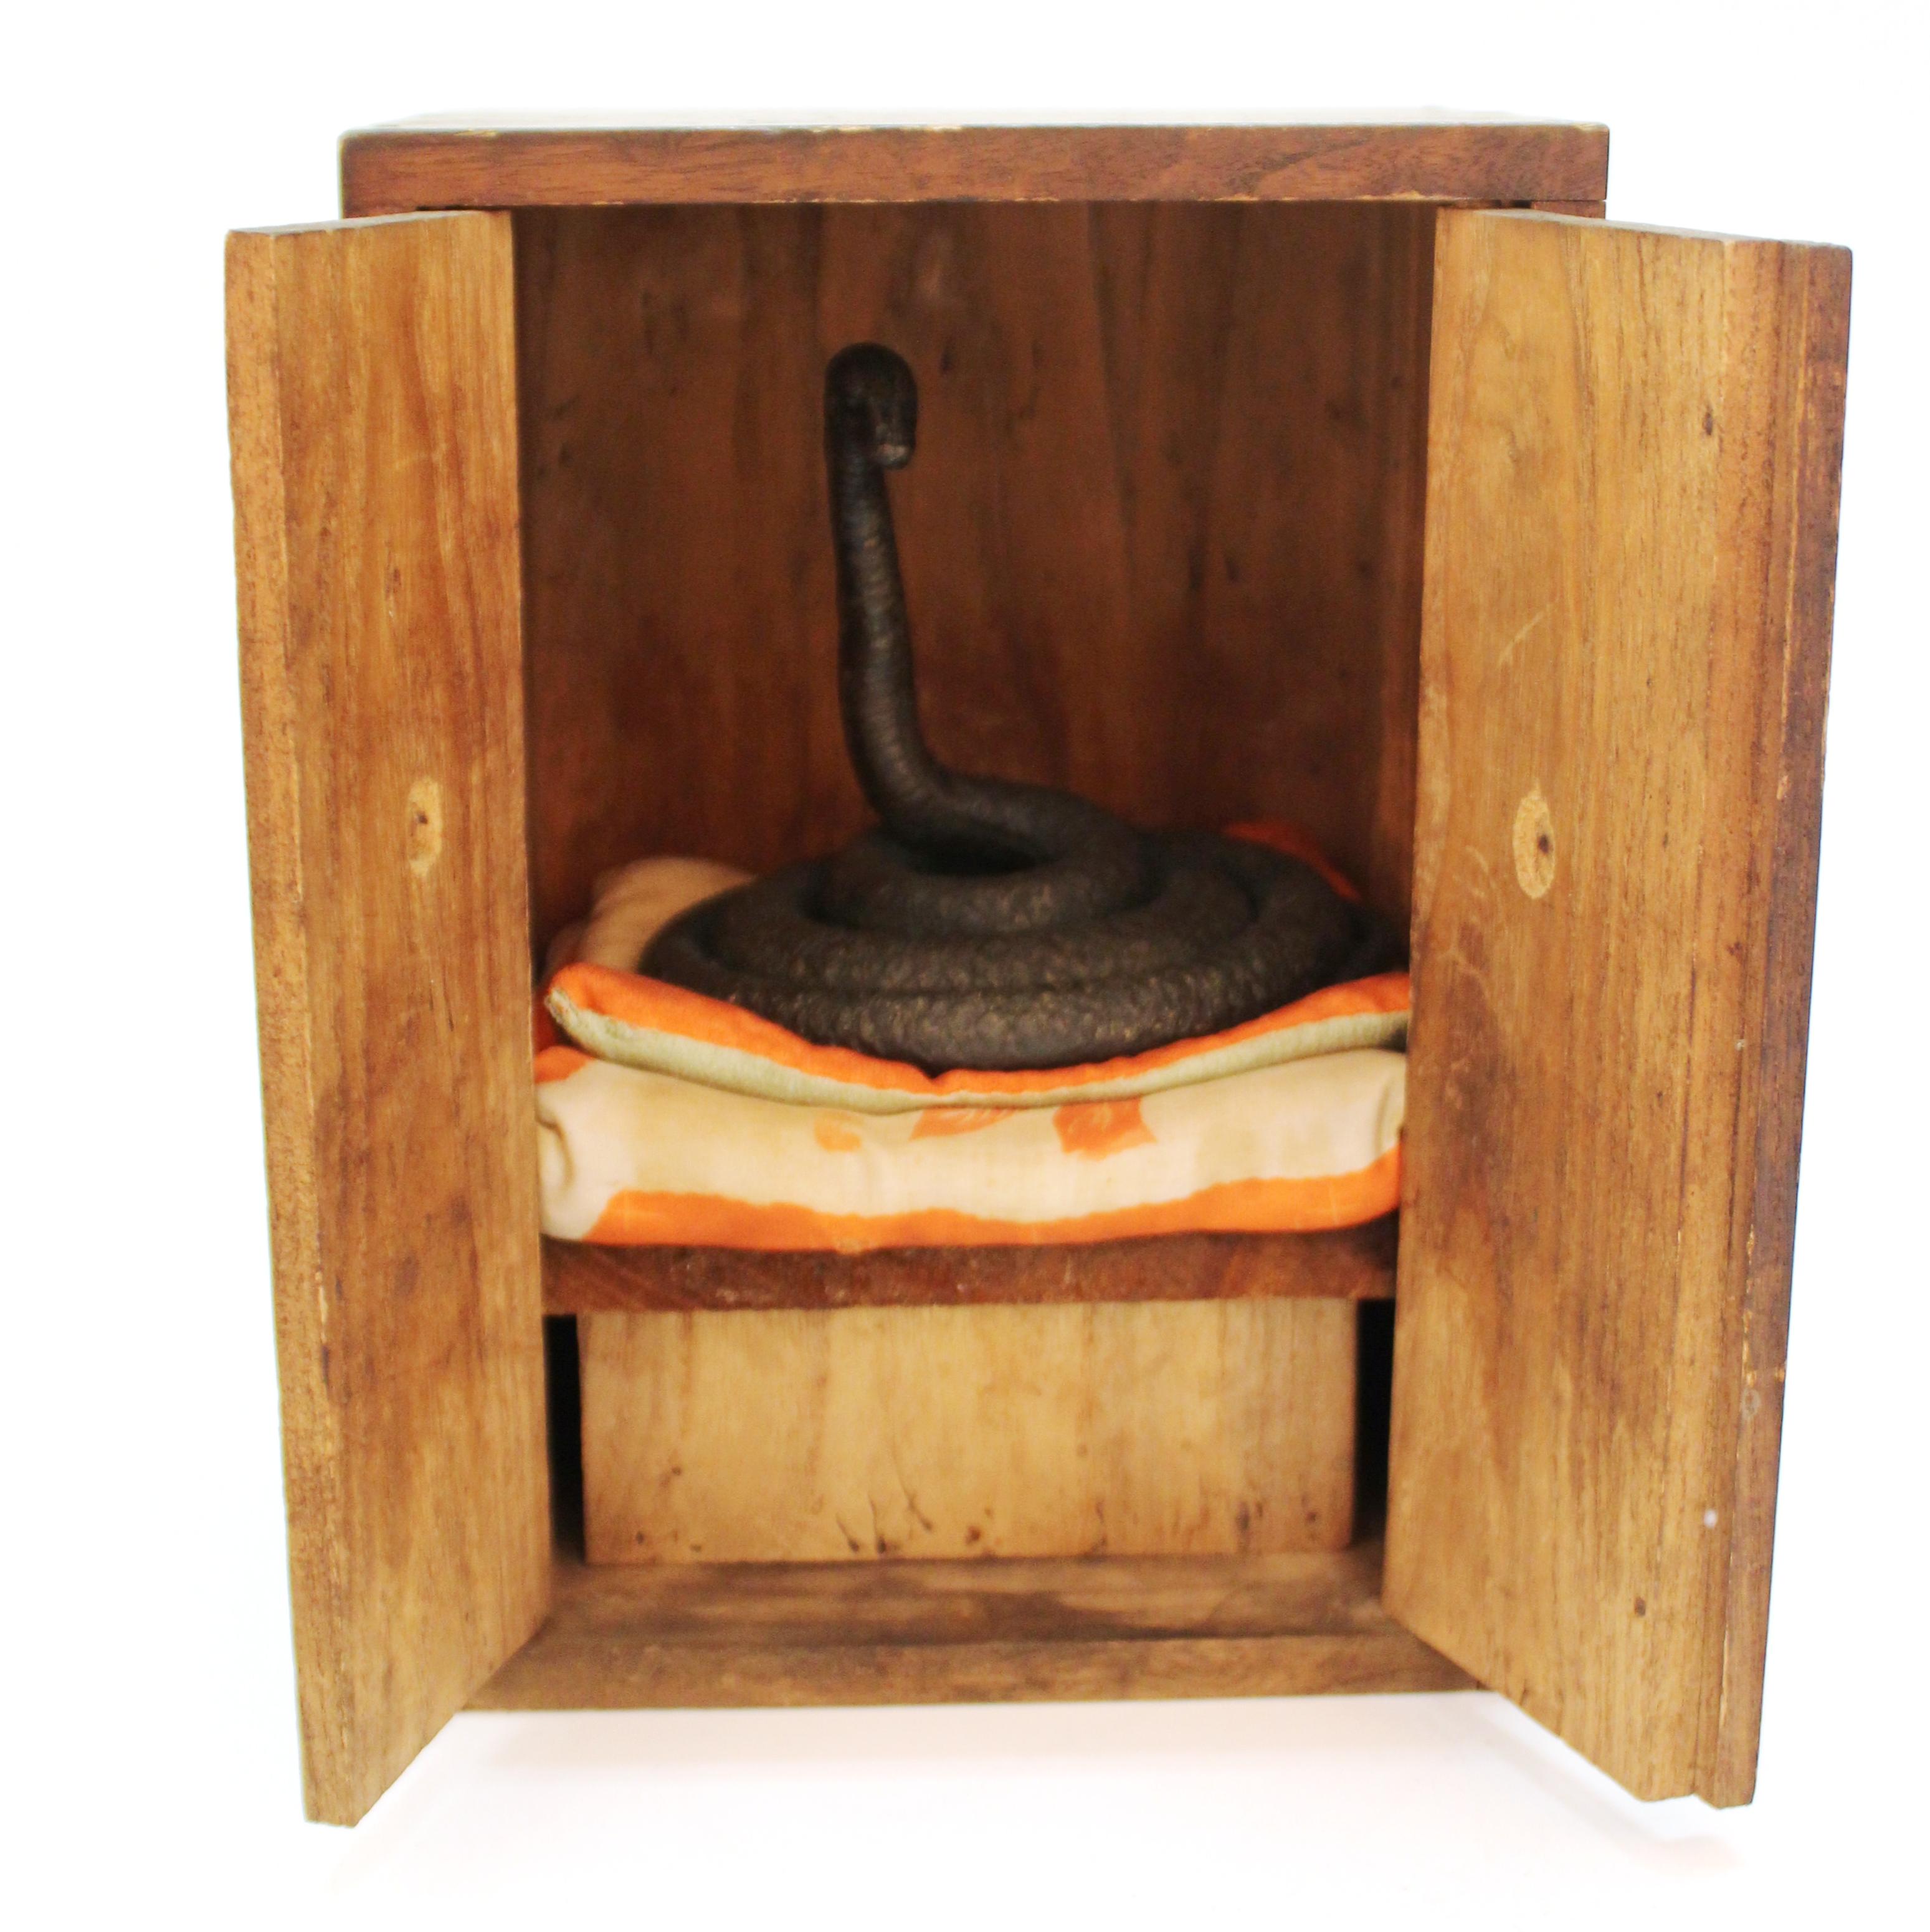 Japanese Edo period bronze snake with wood shrine. The snake sits atop a set of pillows on a wooden bench contained within a wooden shrine box with hinged wooden doors. The snake was likely made between 1800-1850 and is an extremely rare example of